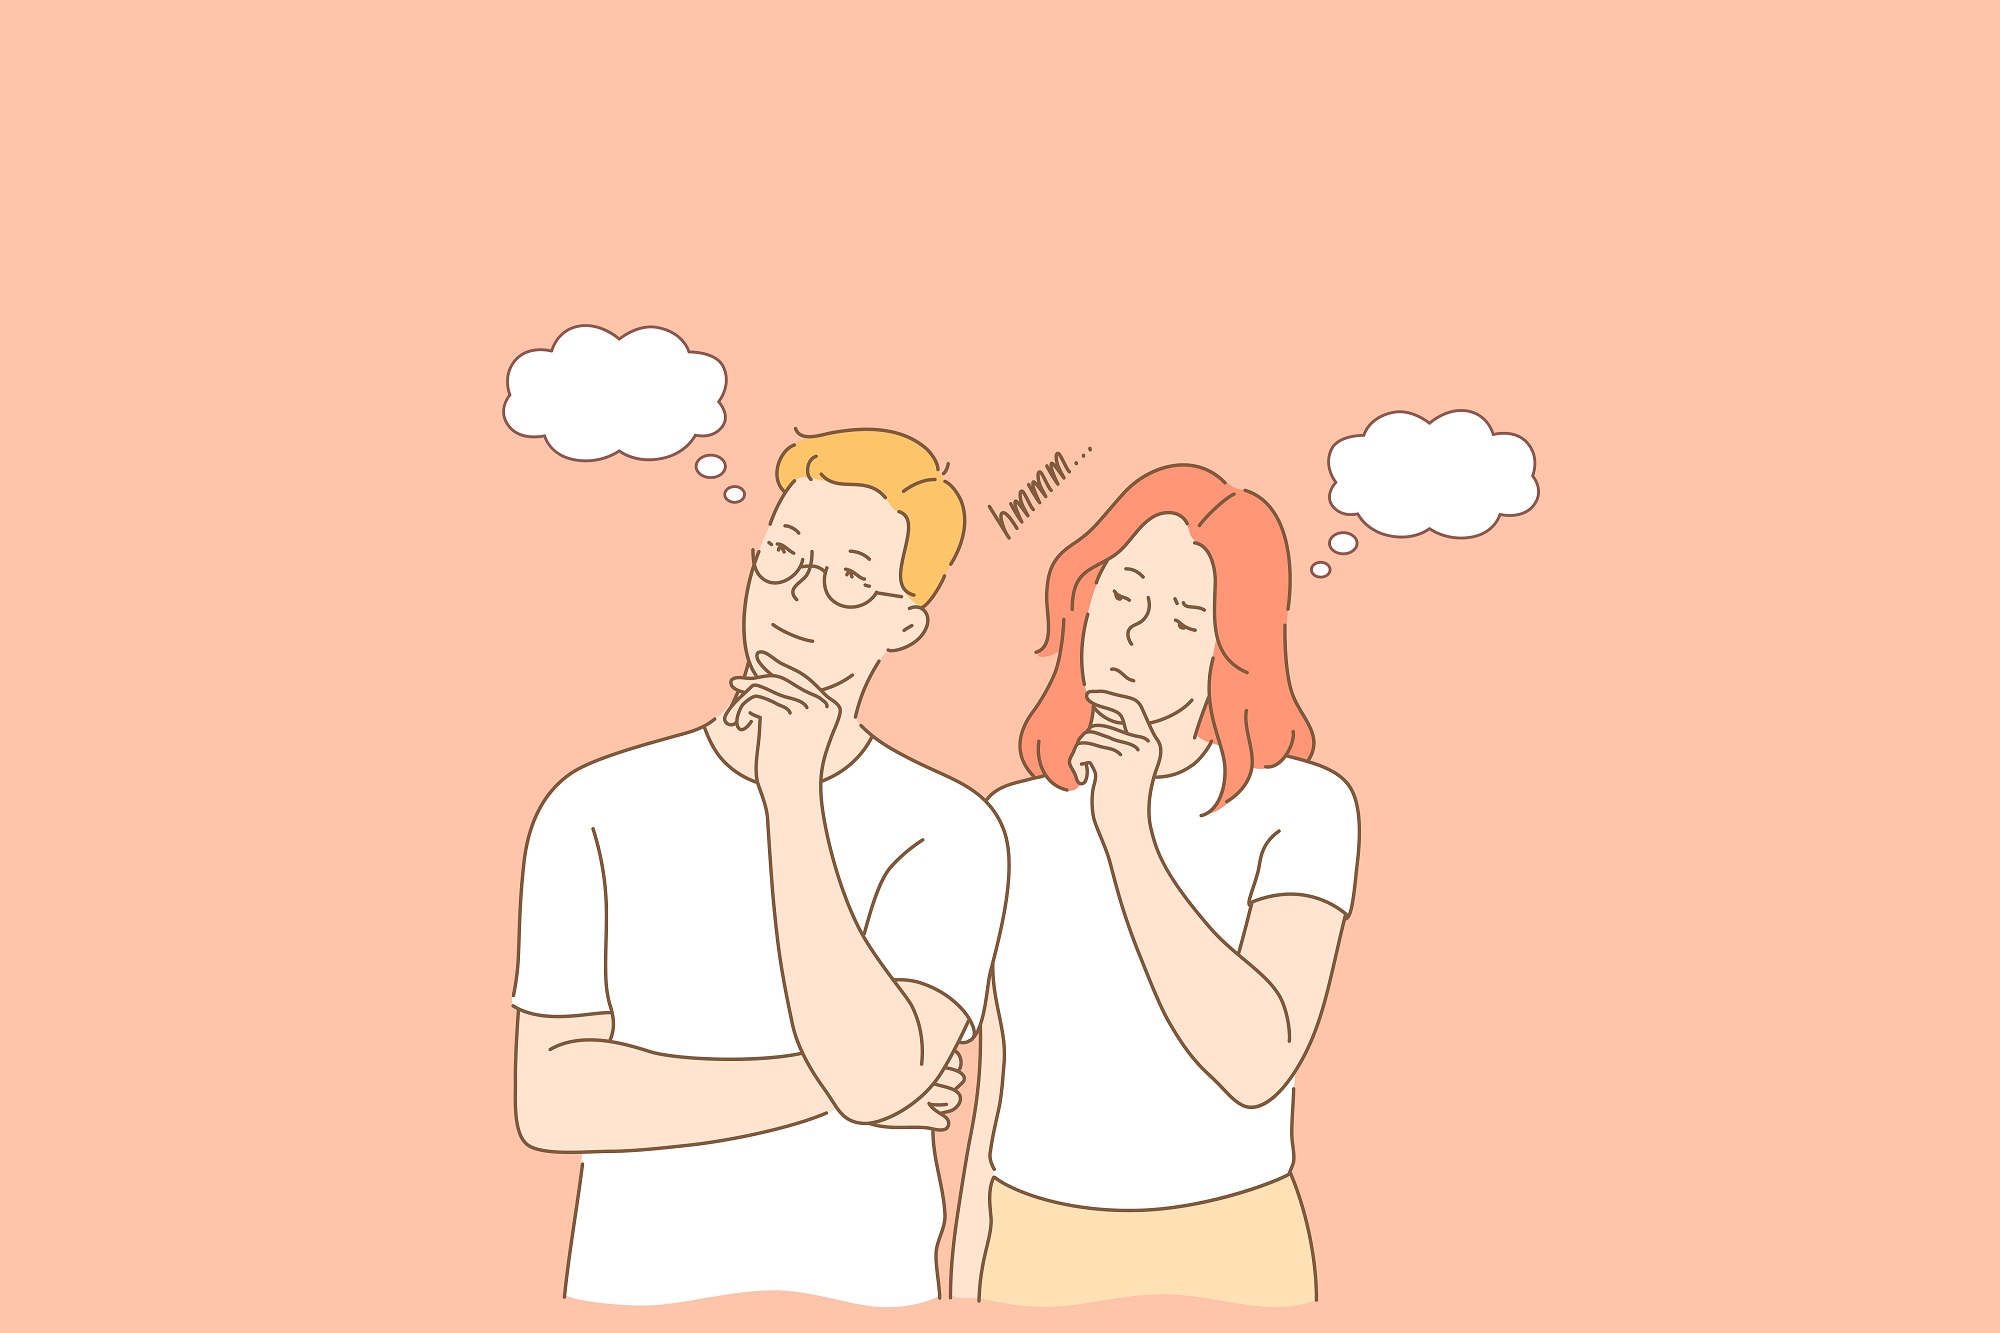 Thoughtful, pensive couple concept. Doubtful girlfriend and boyfriend thinking over some relationship issues, young people daydreaming, using imagination, thought bubbles. Simple flat vector